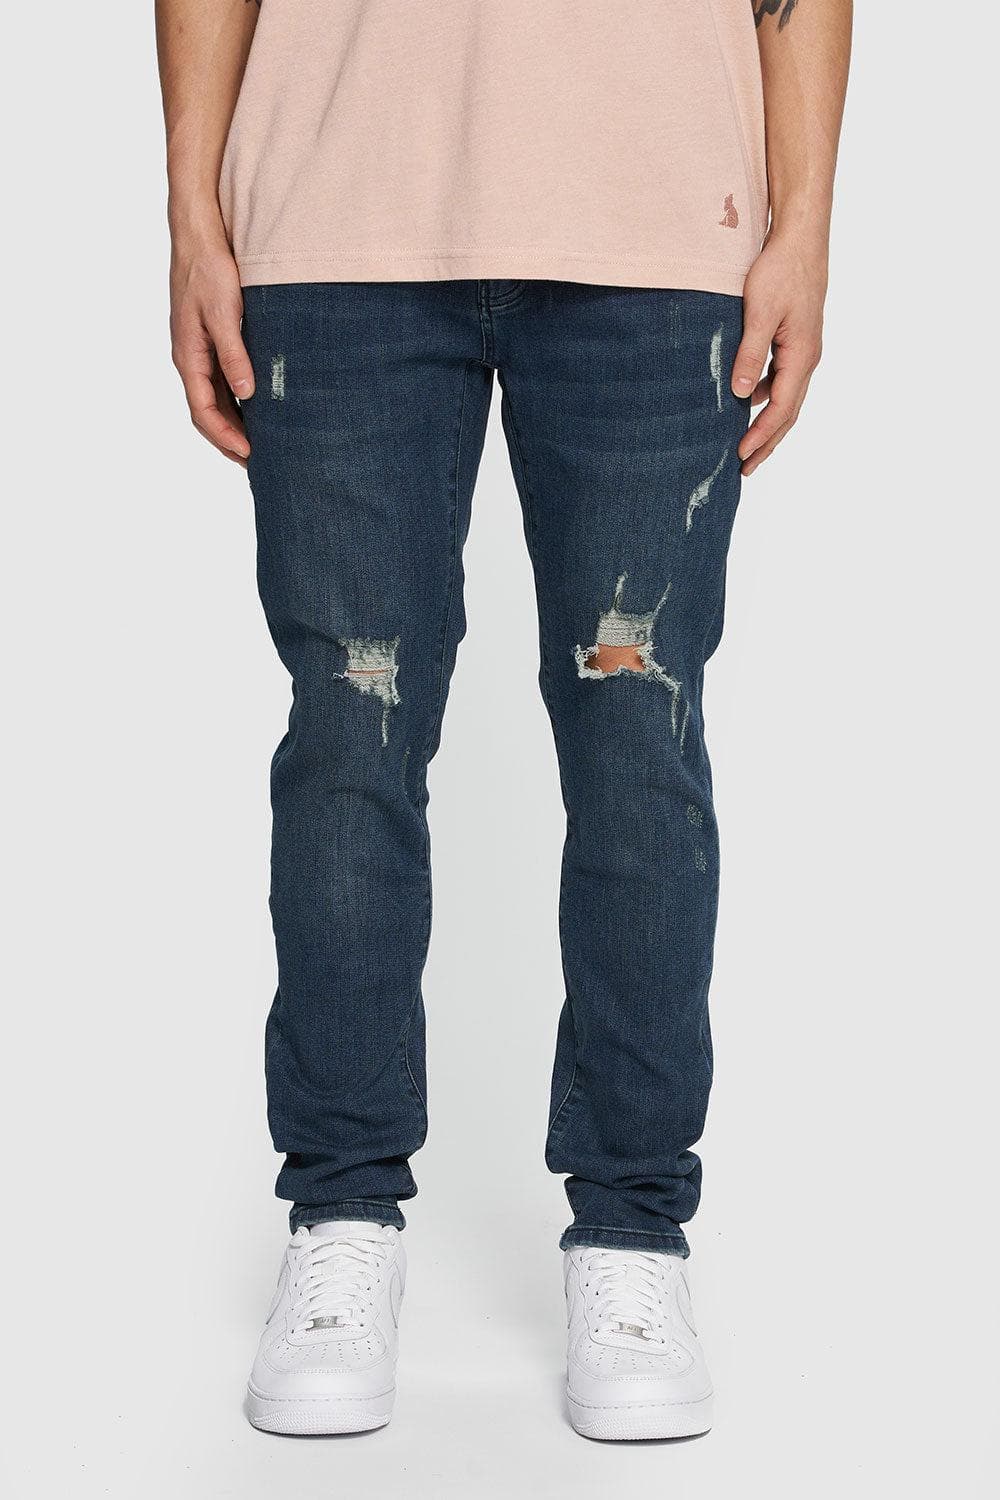 Mens Stretchy Skinny Jeans Ripped Biker Style With Side Stripes, Slim Fit Destroyed  Denim, Hip Hop Pencil Pants From Bidalina, $24.37 | DHgate.Com